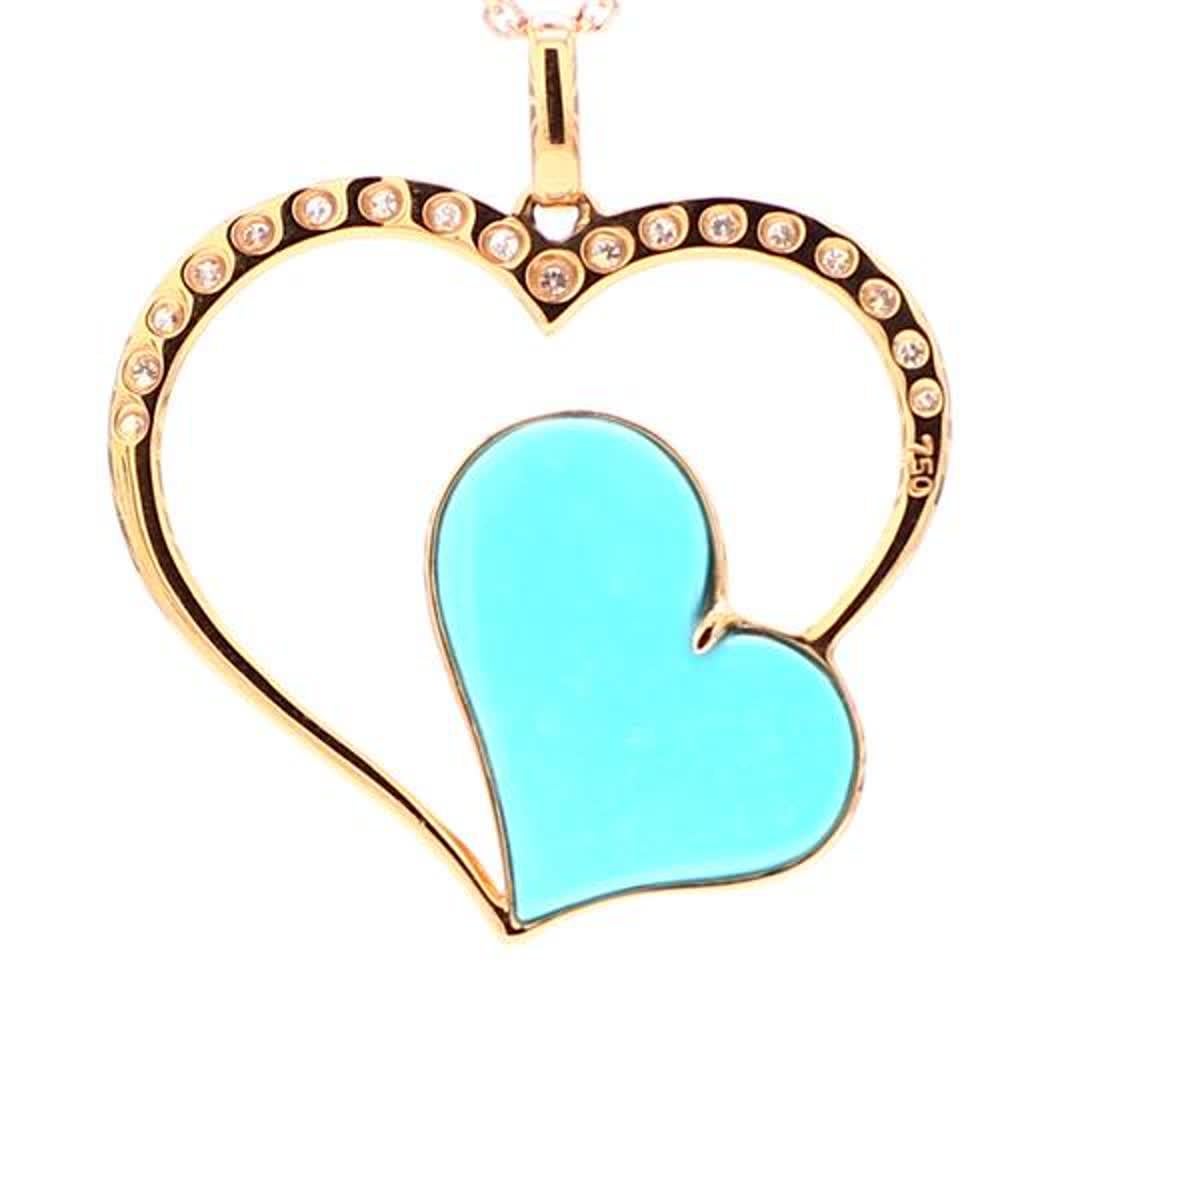 RareGemWorld's classic turquoise pendant. Mounted in a beautiful 18K Rose Gold setting with a heart shape natural turquoise. The turquoise is complimented by natural round white diamond melee in a beautiful heart-shape. This pendant is guaranteed to